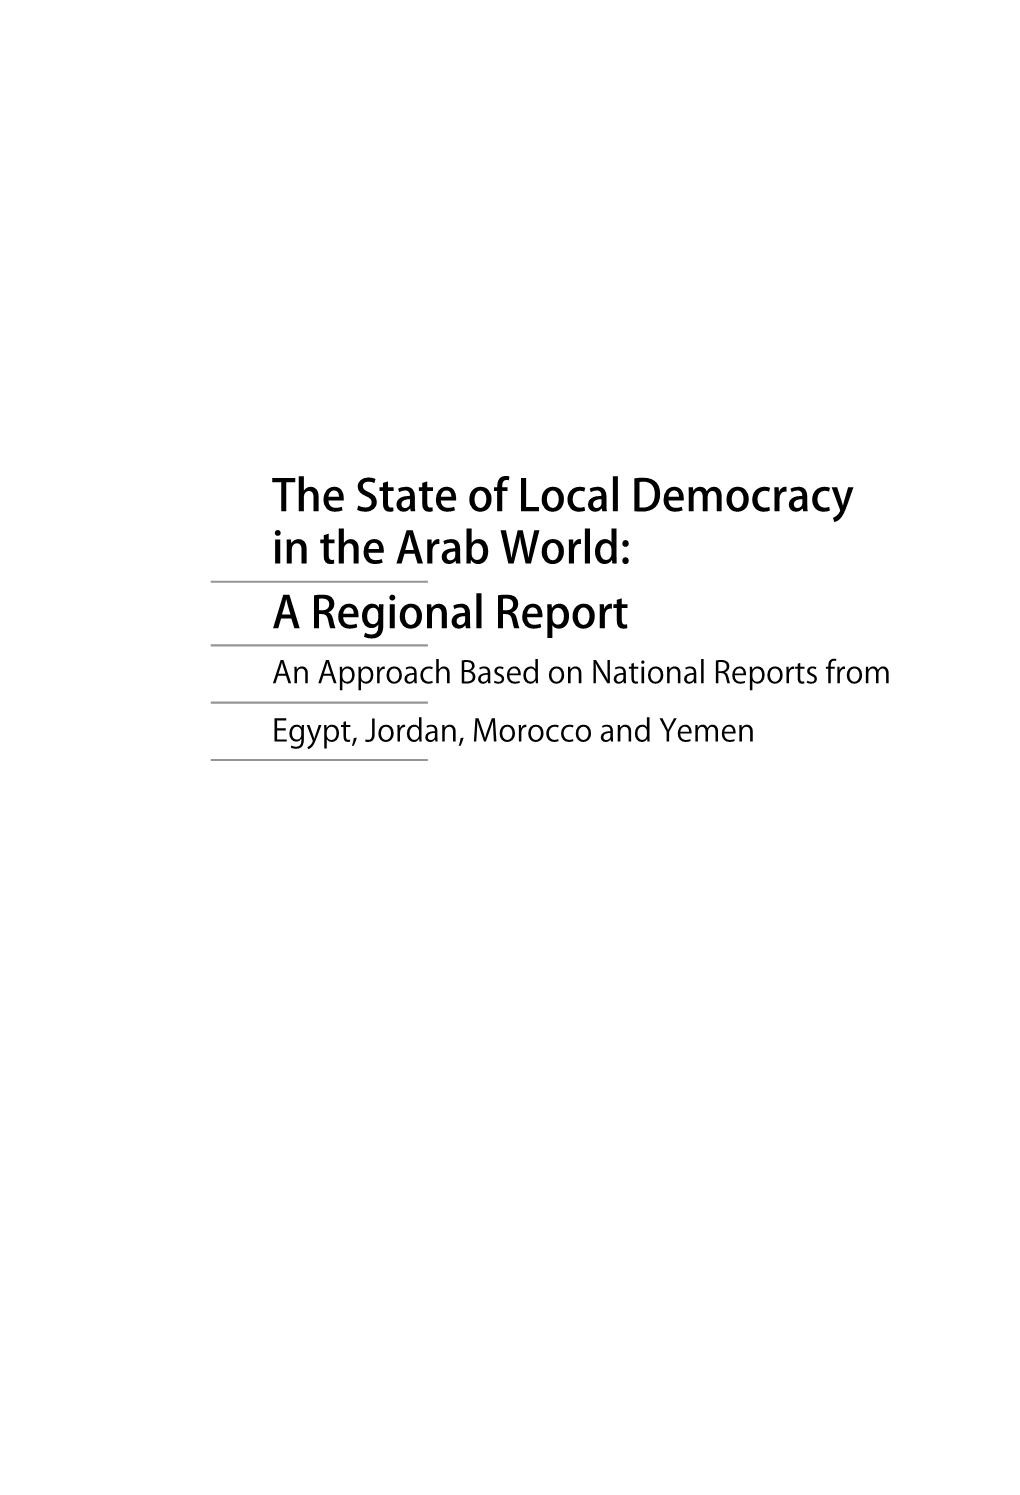 The State of Local Democracy in the Arab World: a Regional Report an Approach Based on National Reports from Egypt, Jordan, Morocco and Yemen